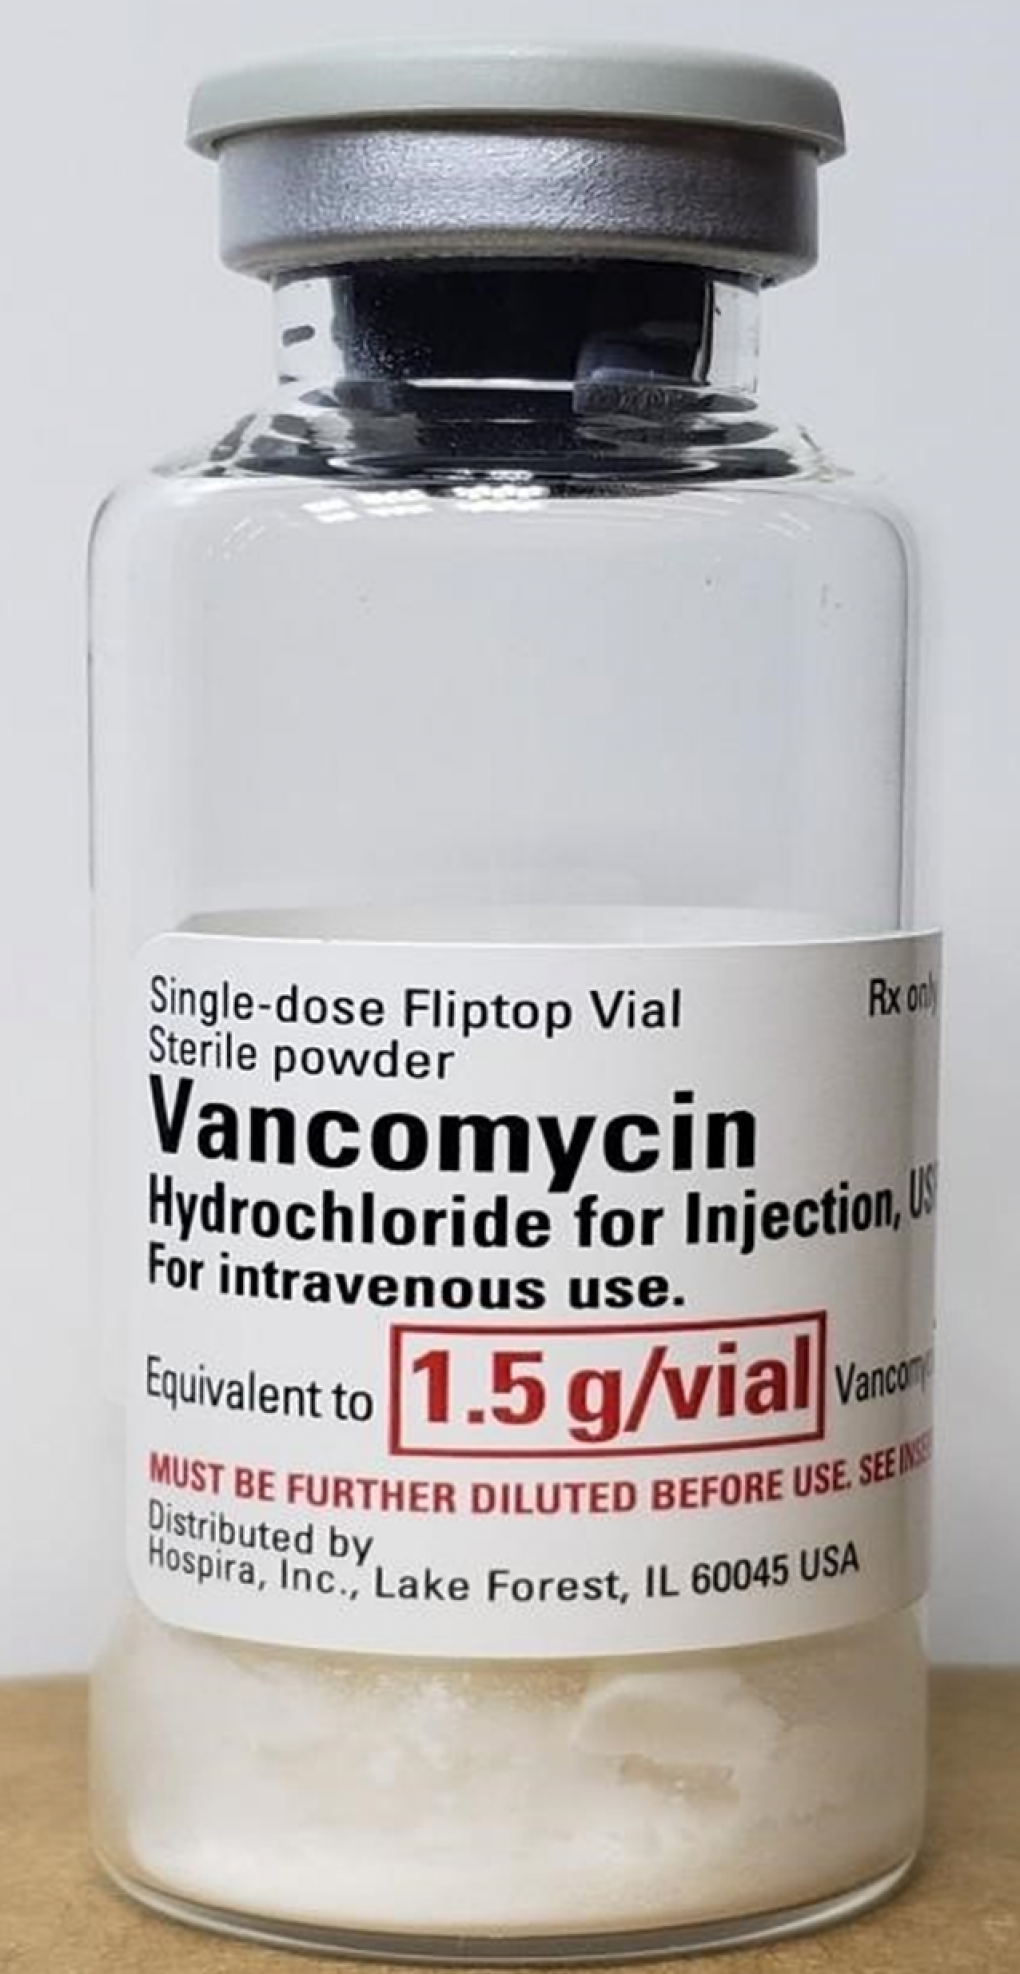 Glass Particles in Vial Lead to Vancomycin Recall